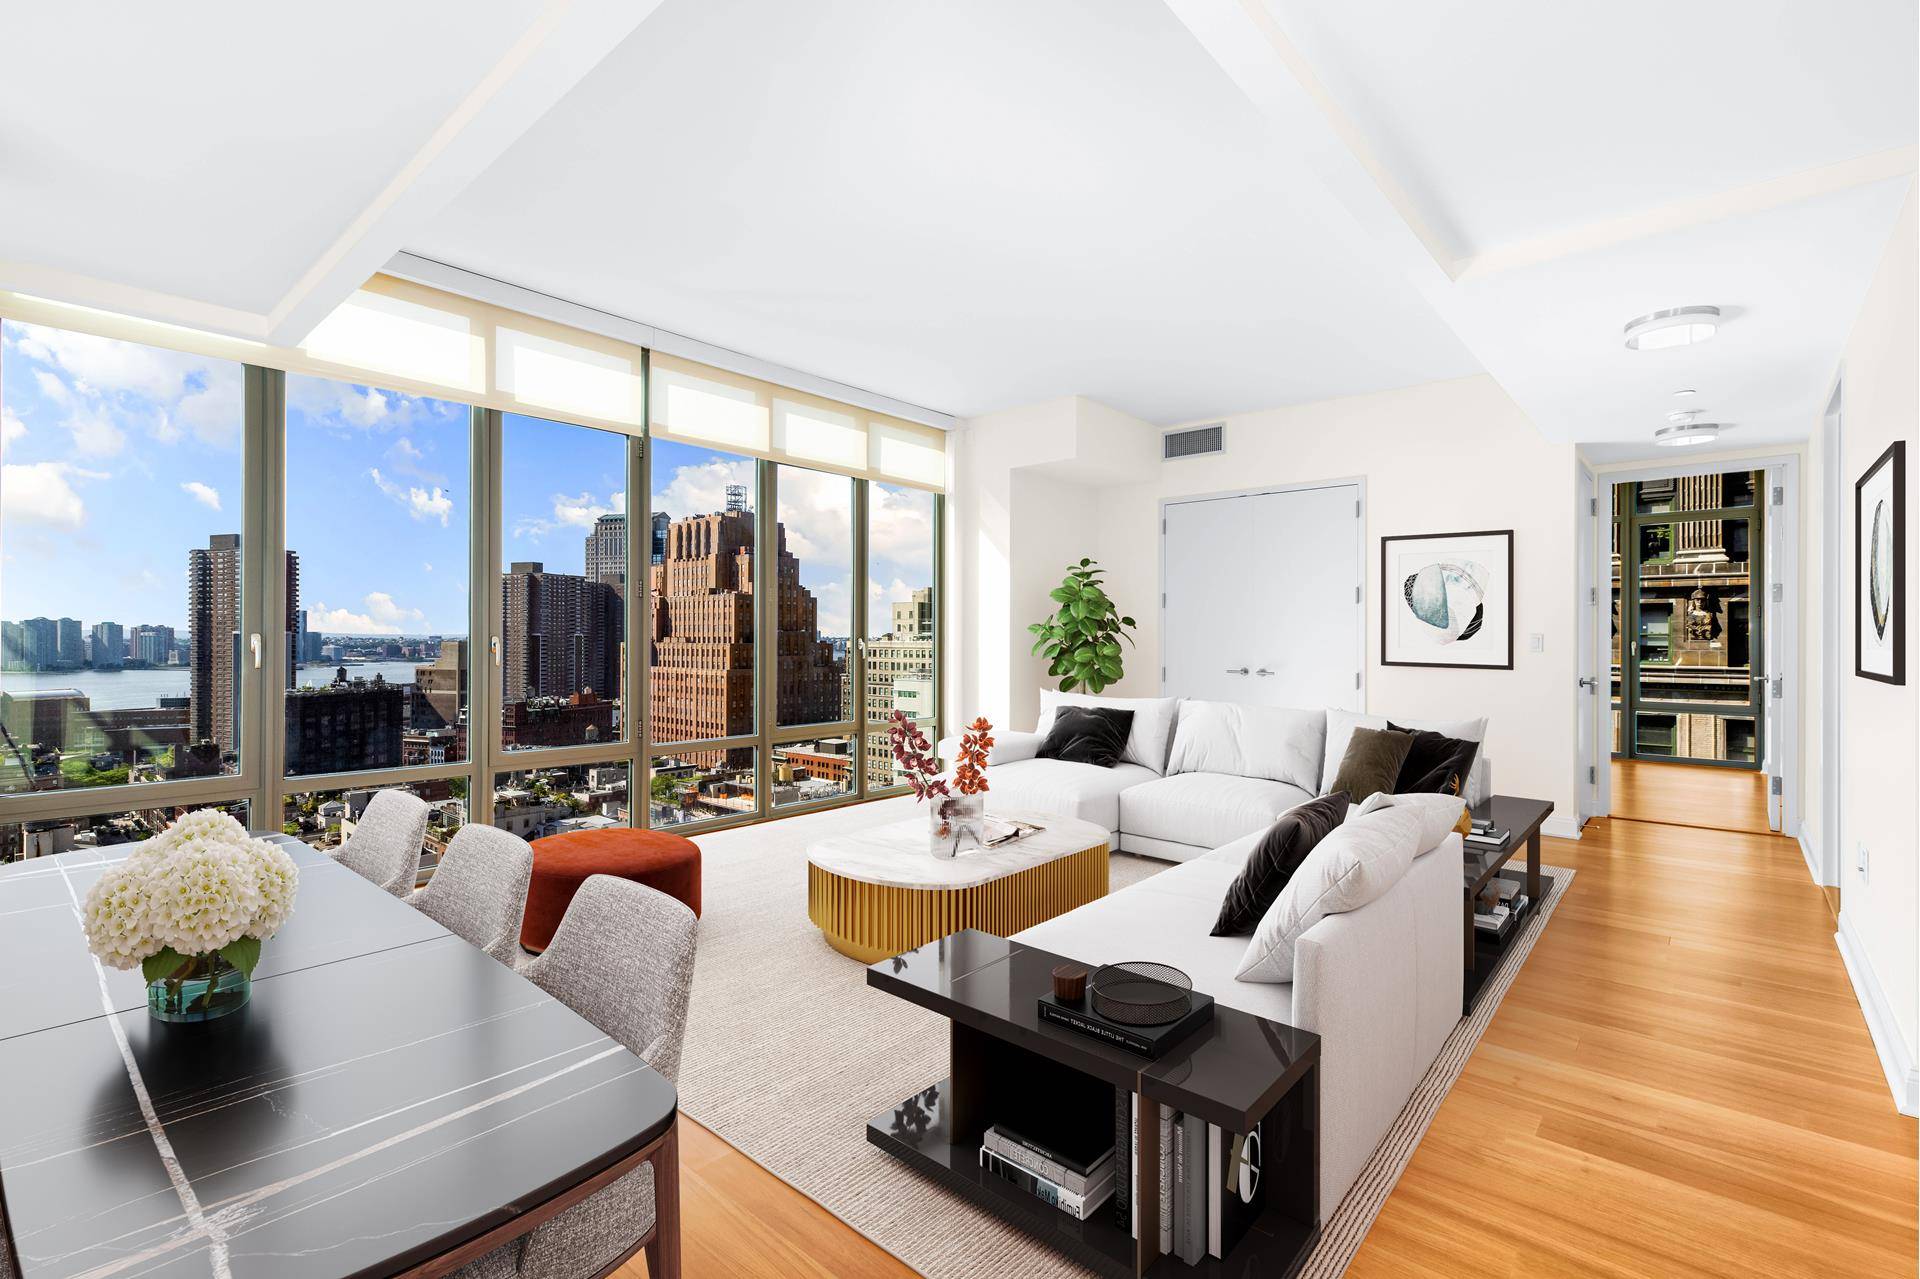 Feast your eyes on this beautiful high floor apartment at the luxurious Reade57 condominium in prime Tribeca and youll definitely want to make it your own !